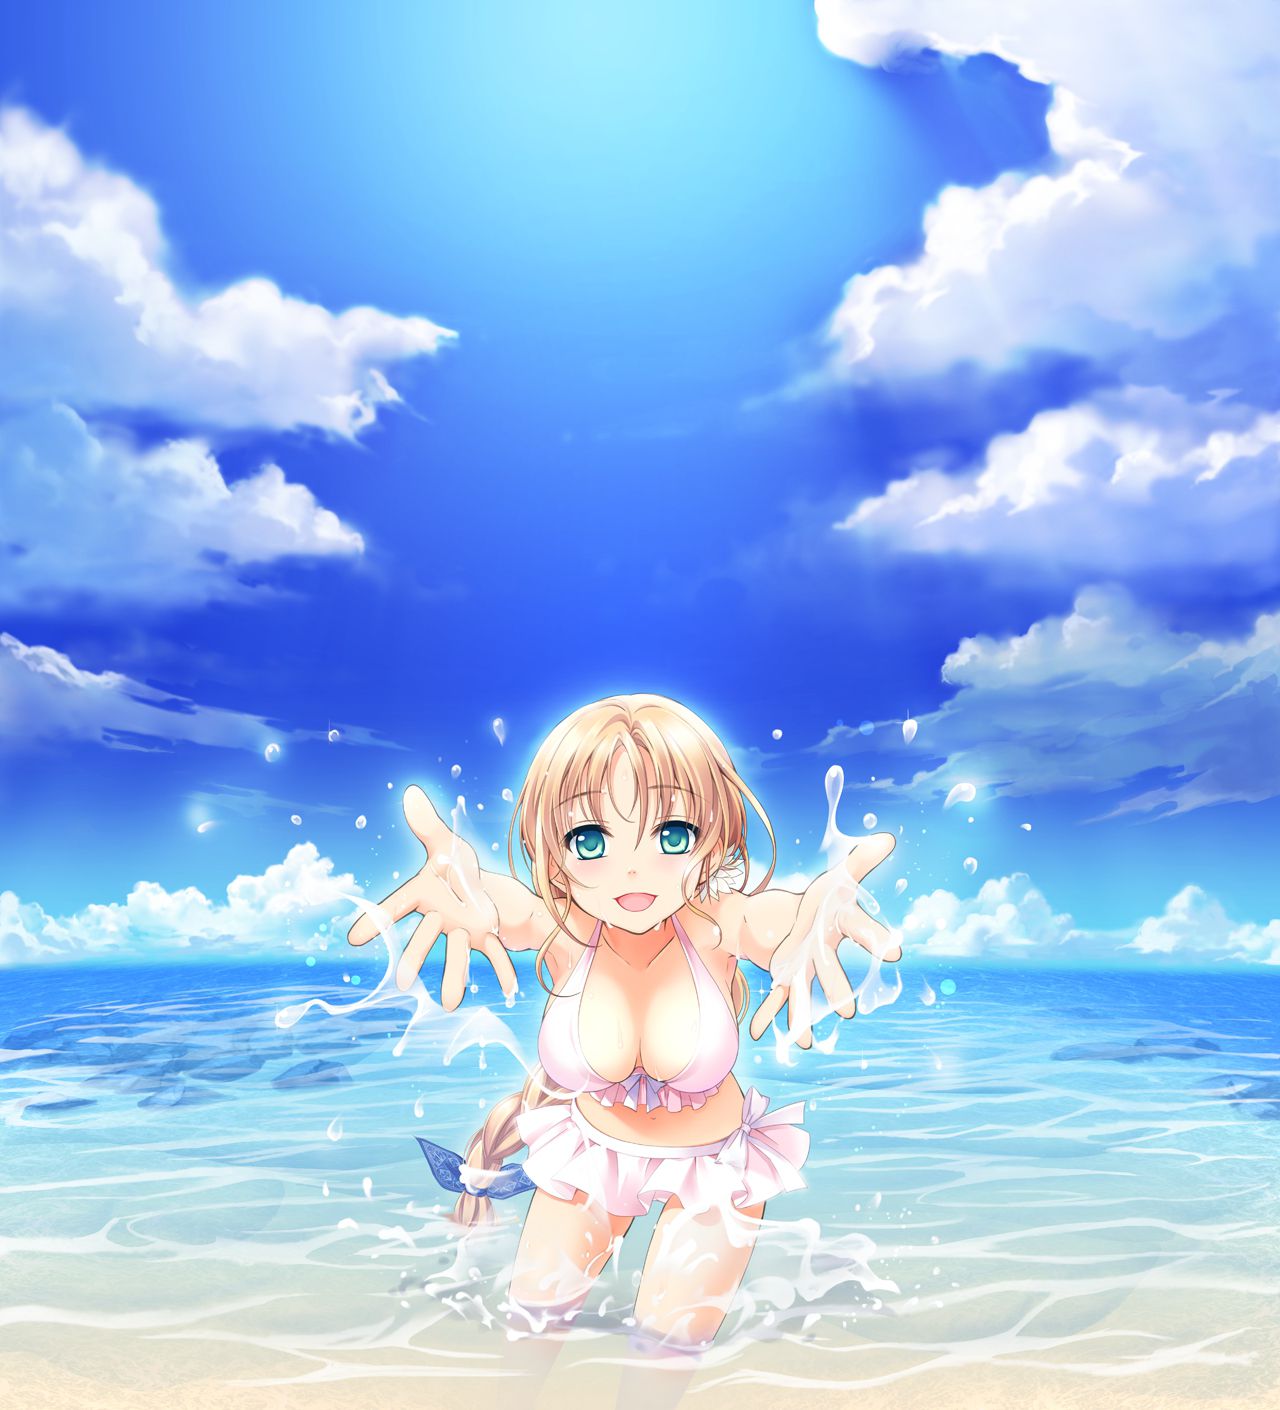 [High quality] spray felt that it would be MoE pictures part 1 19